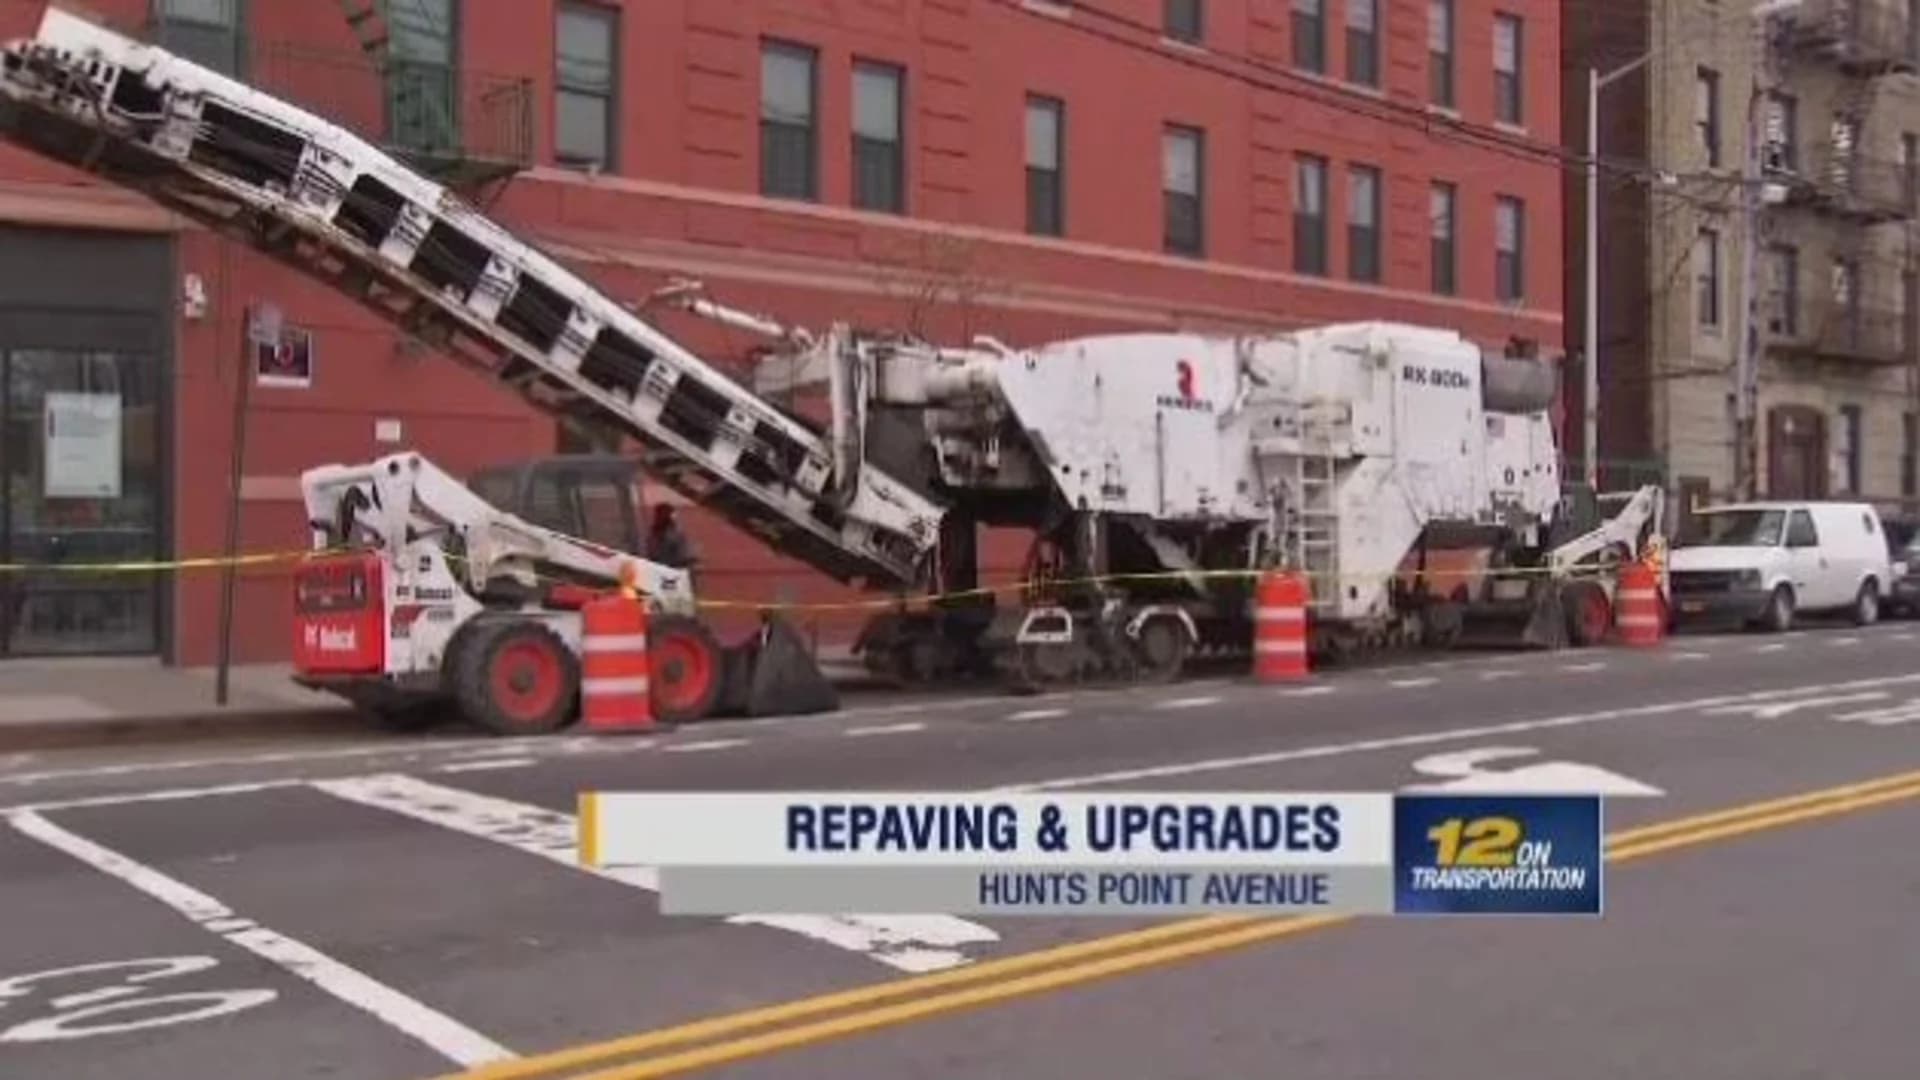 Work set to begin on Hunts Point Ave. paving project